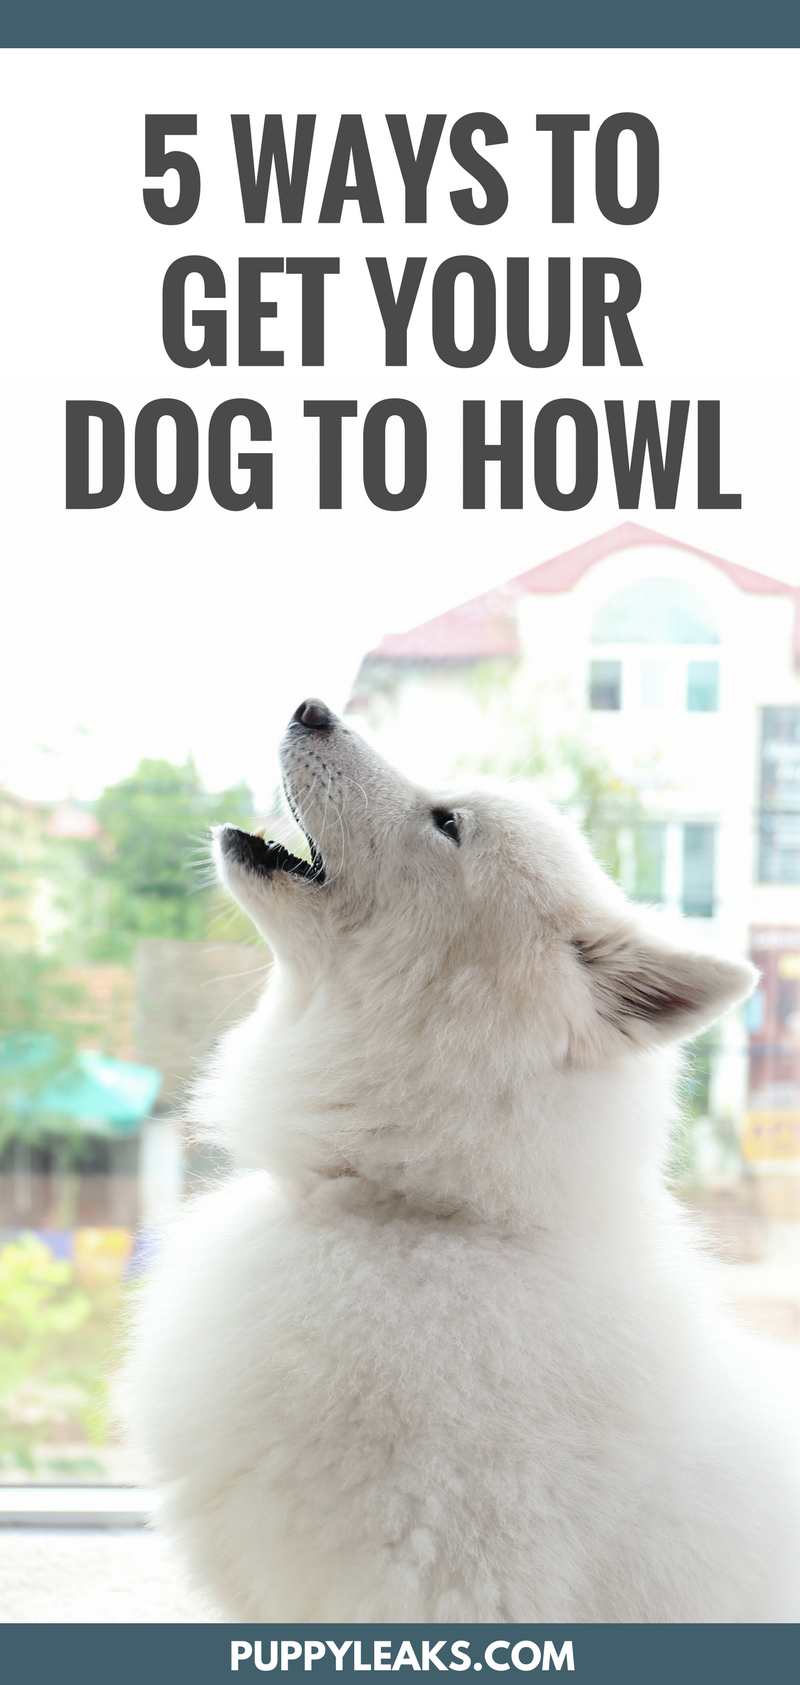 How to make your dog howl. How to train your dog to howl on command, and videos guaranteed to make your dog howl.